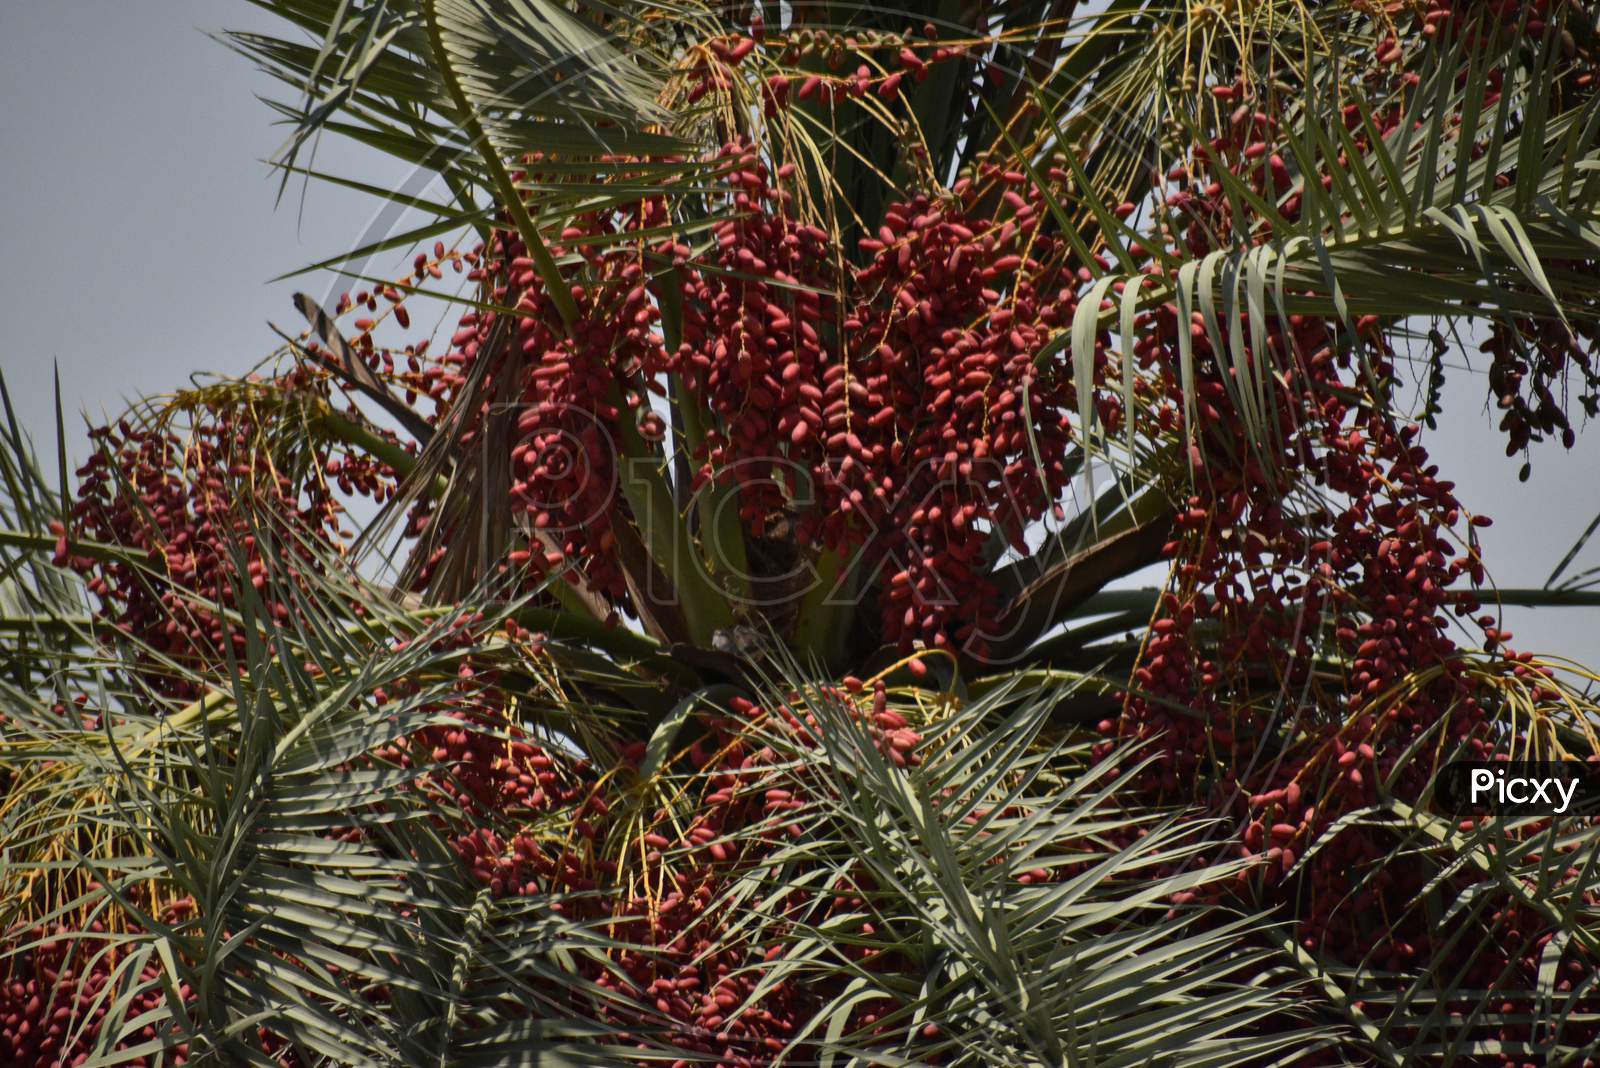 Ripe Dates Palm Fruit With Branches On Dates Palm Tree In Abu Dhabi.